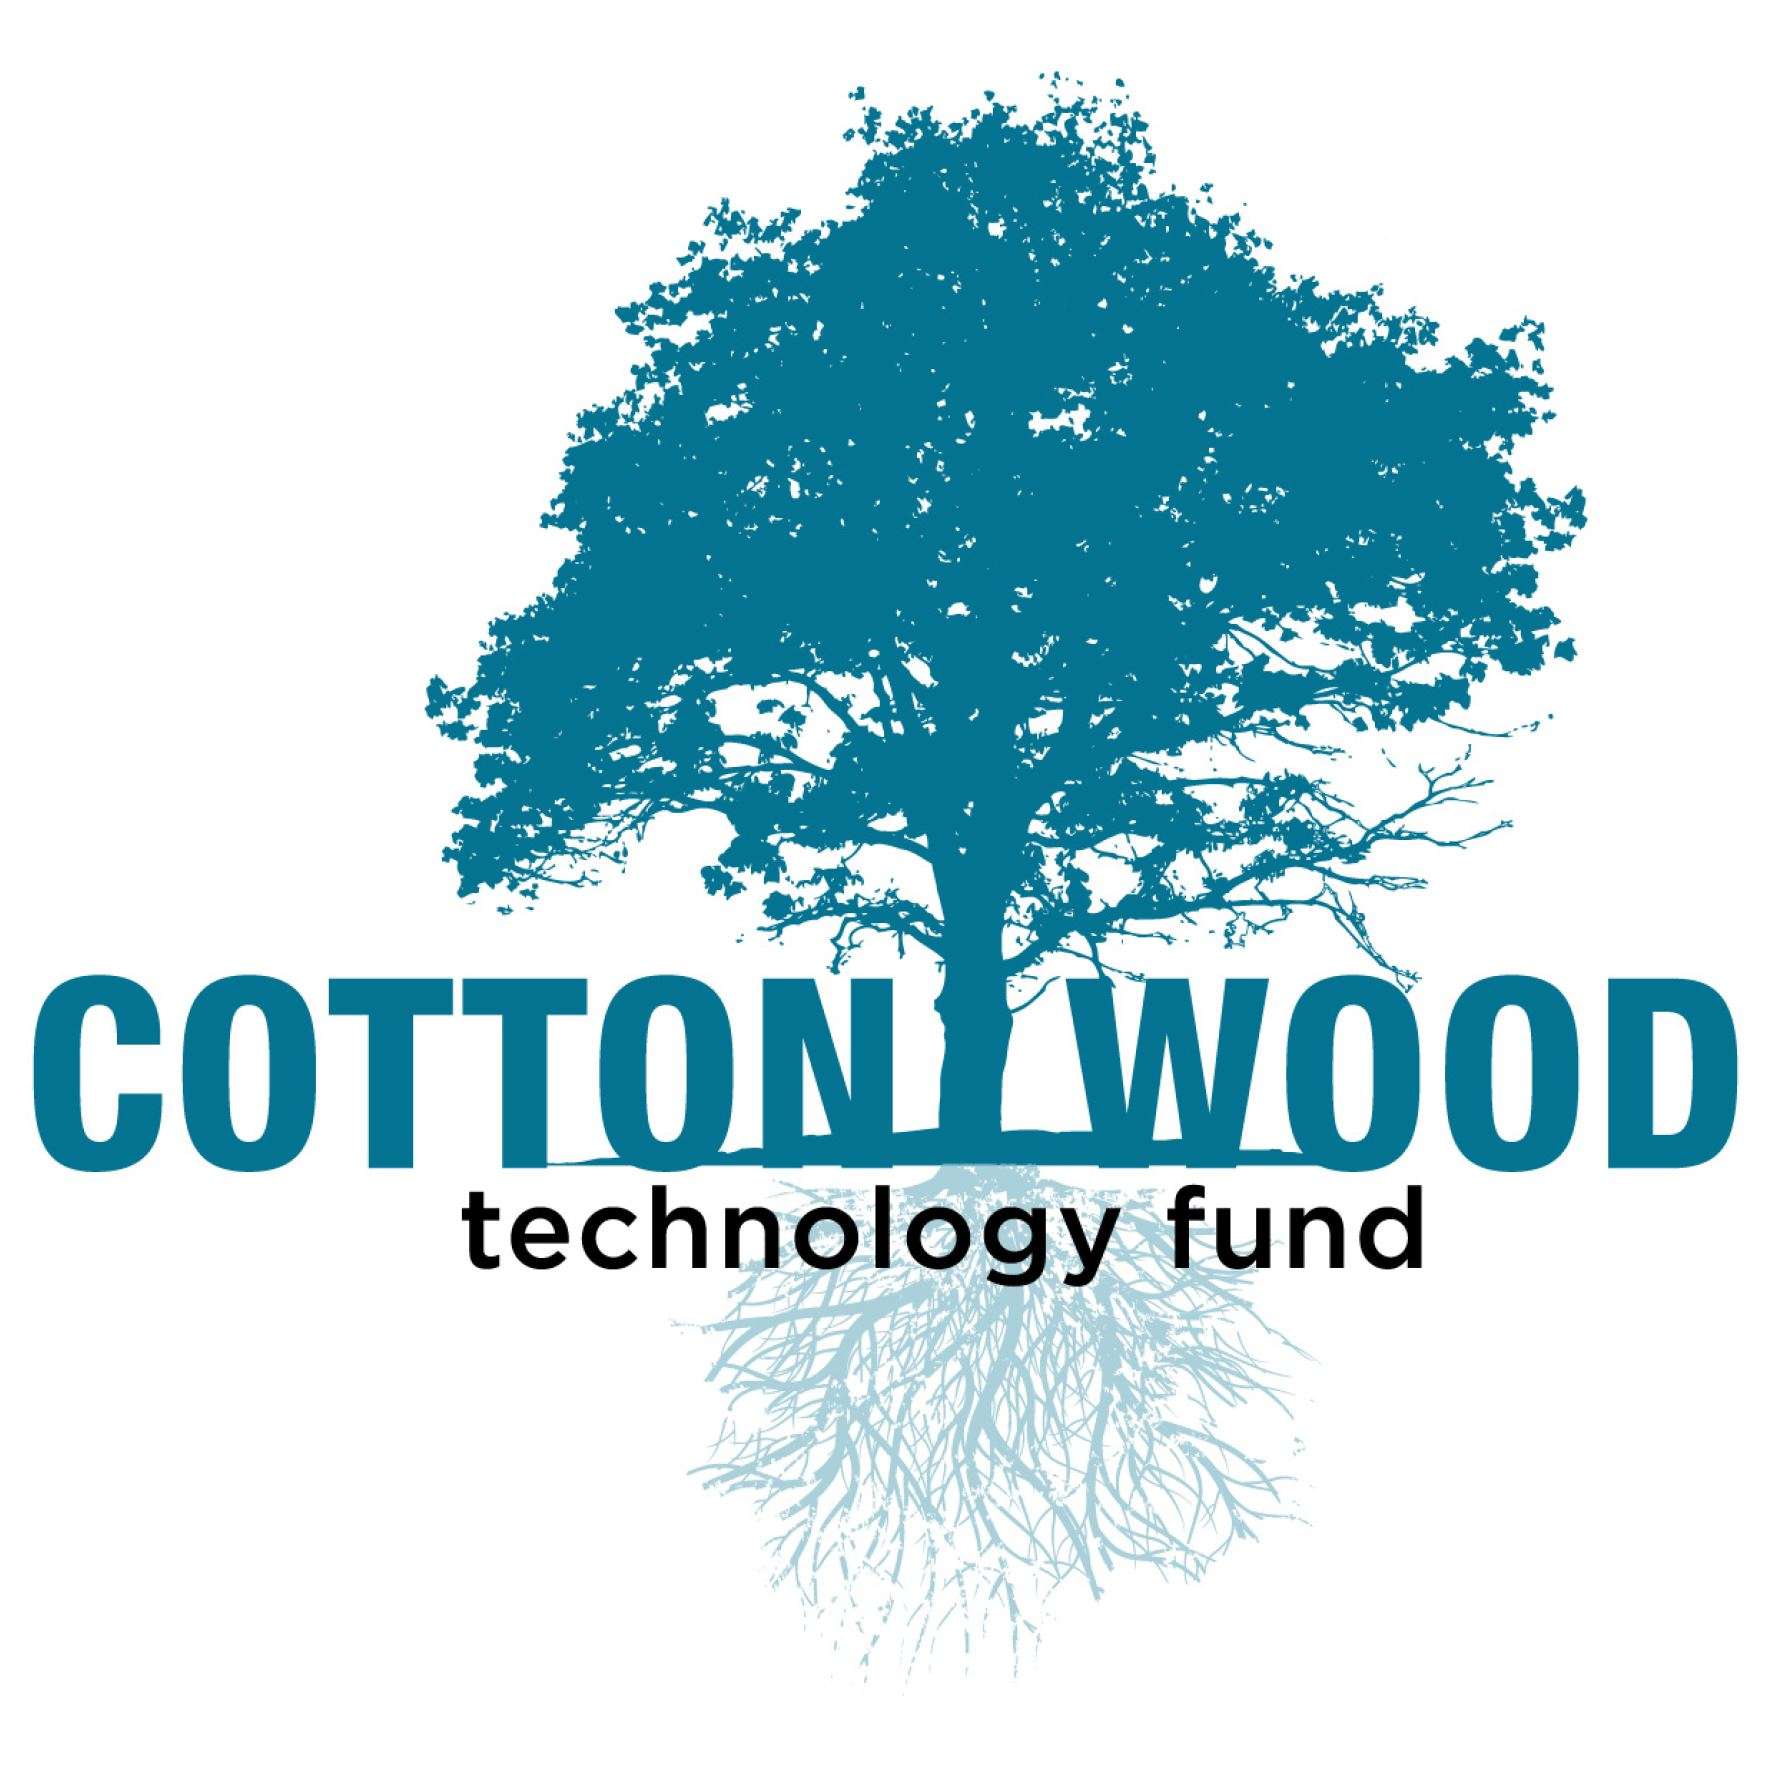 Cotton Traders - Crunchbase Company Profile & Funding